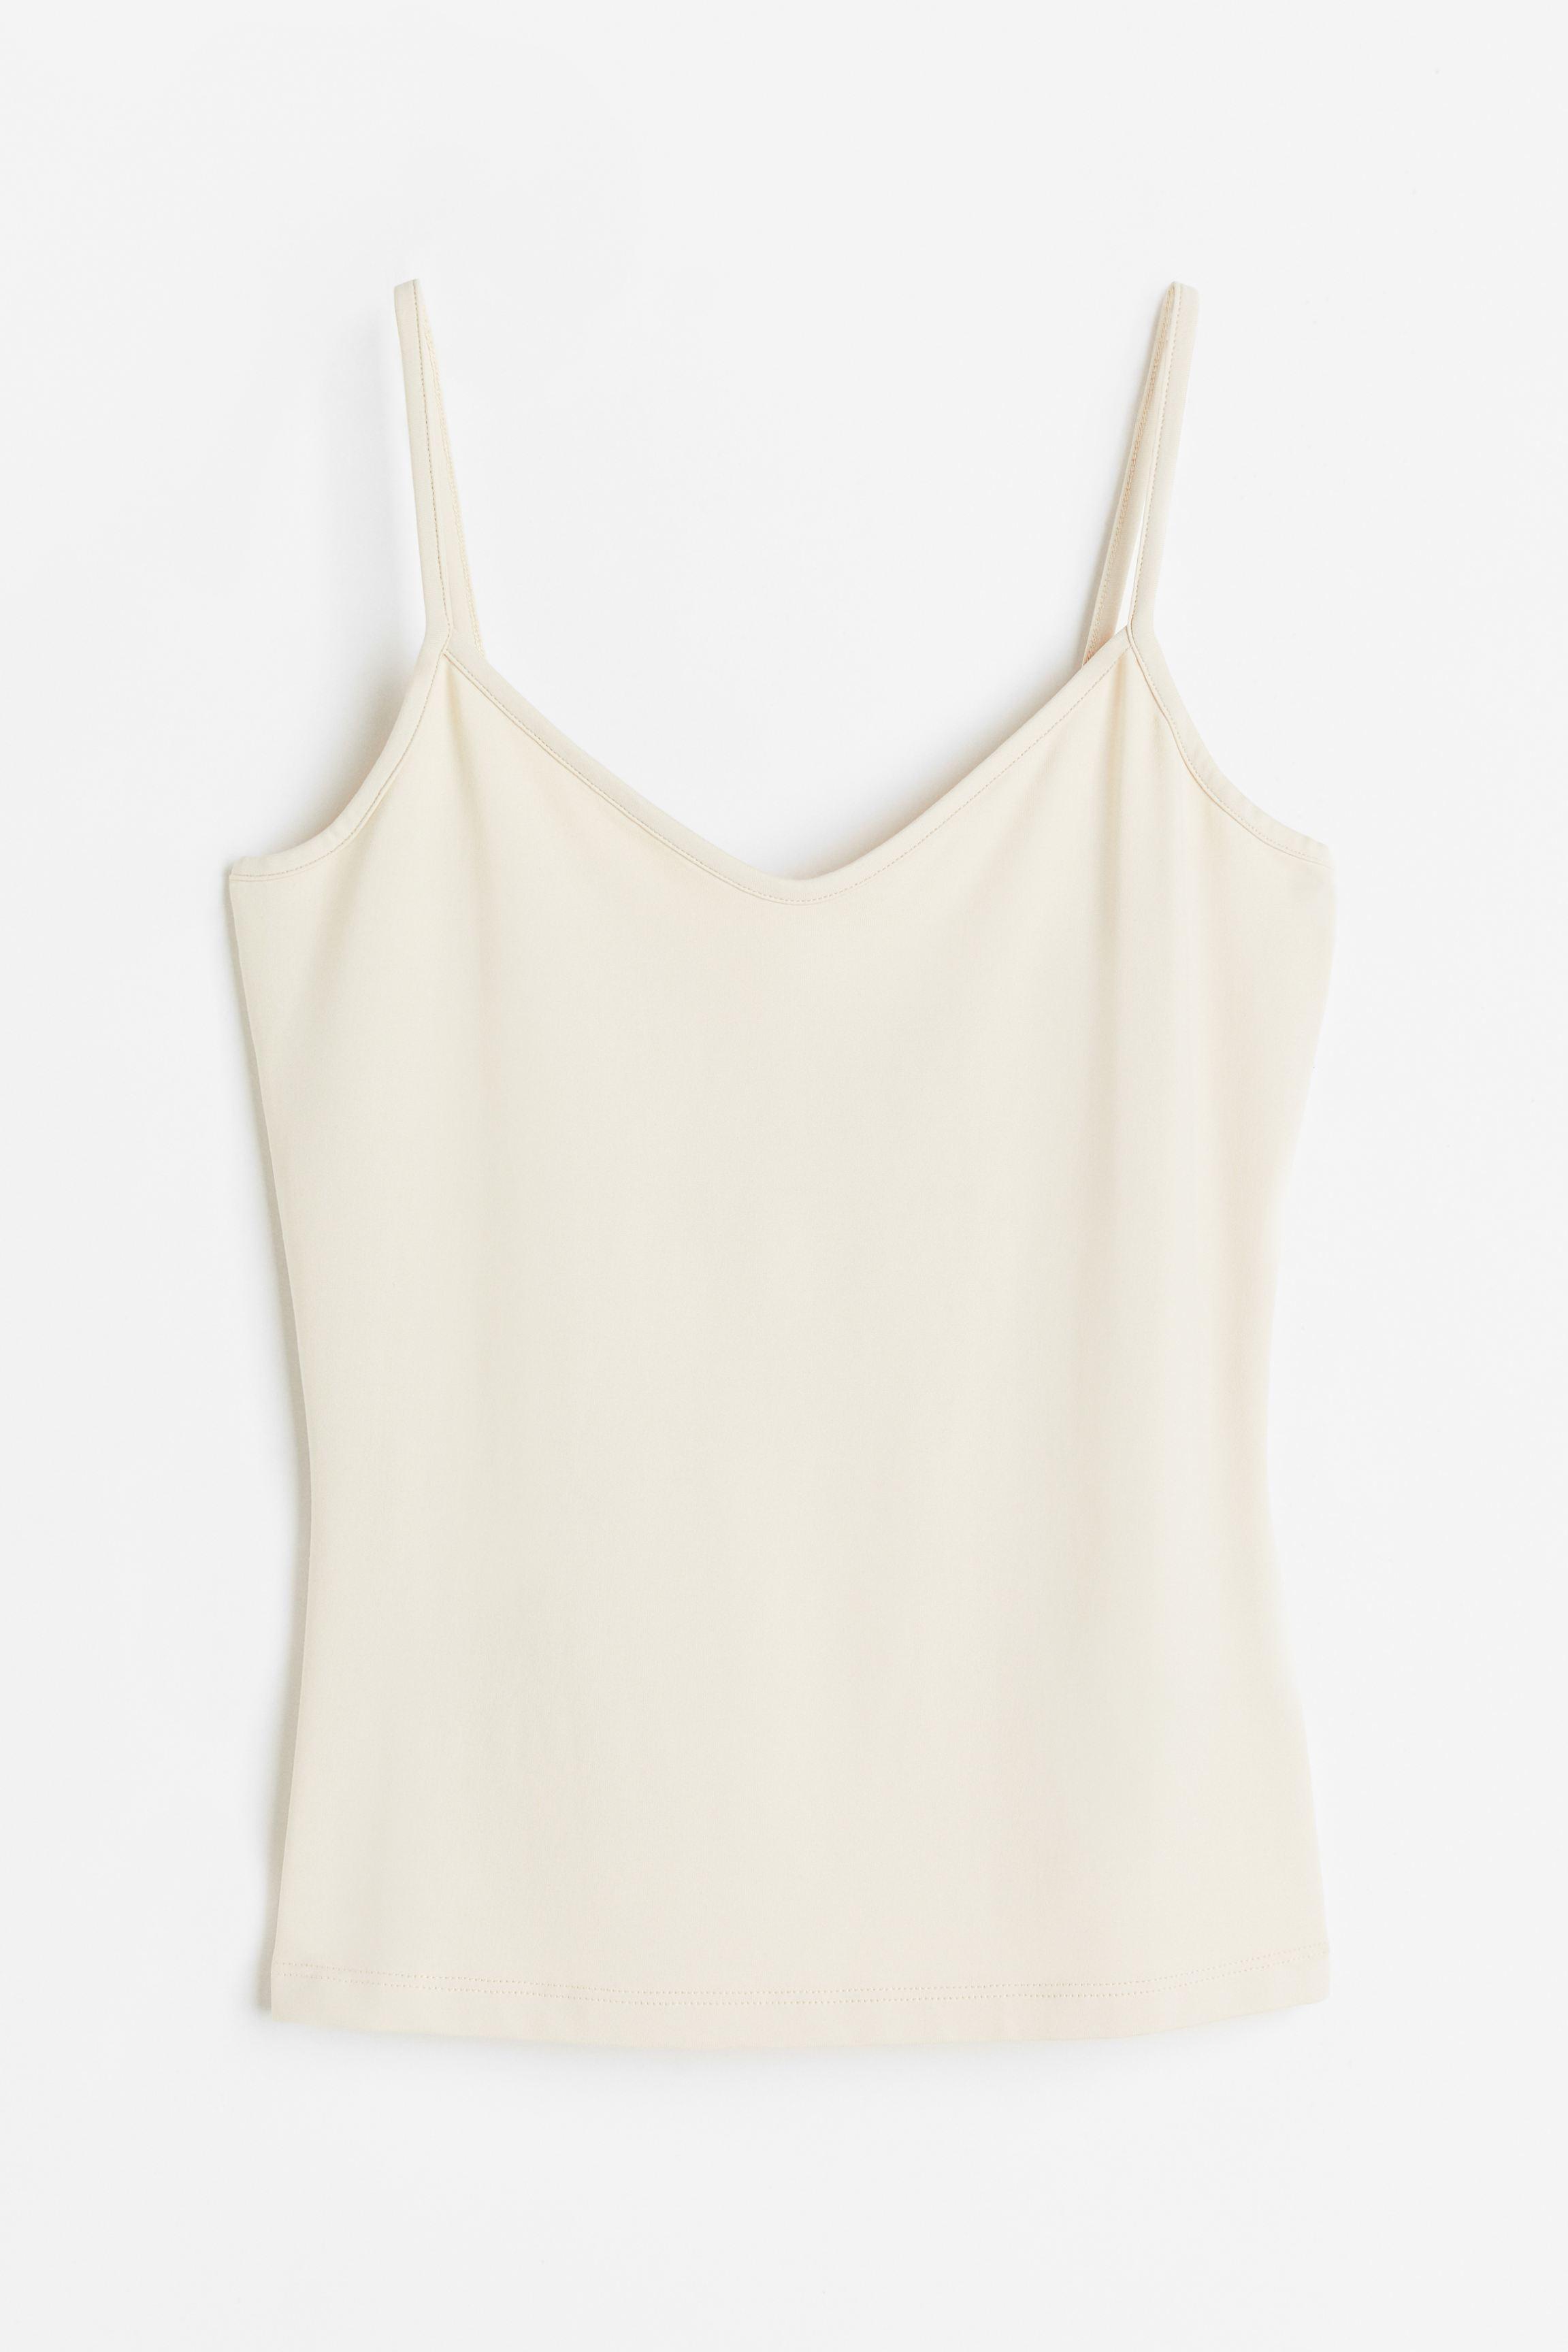 H&M Top in White | Lyst